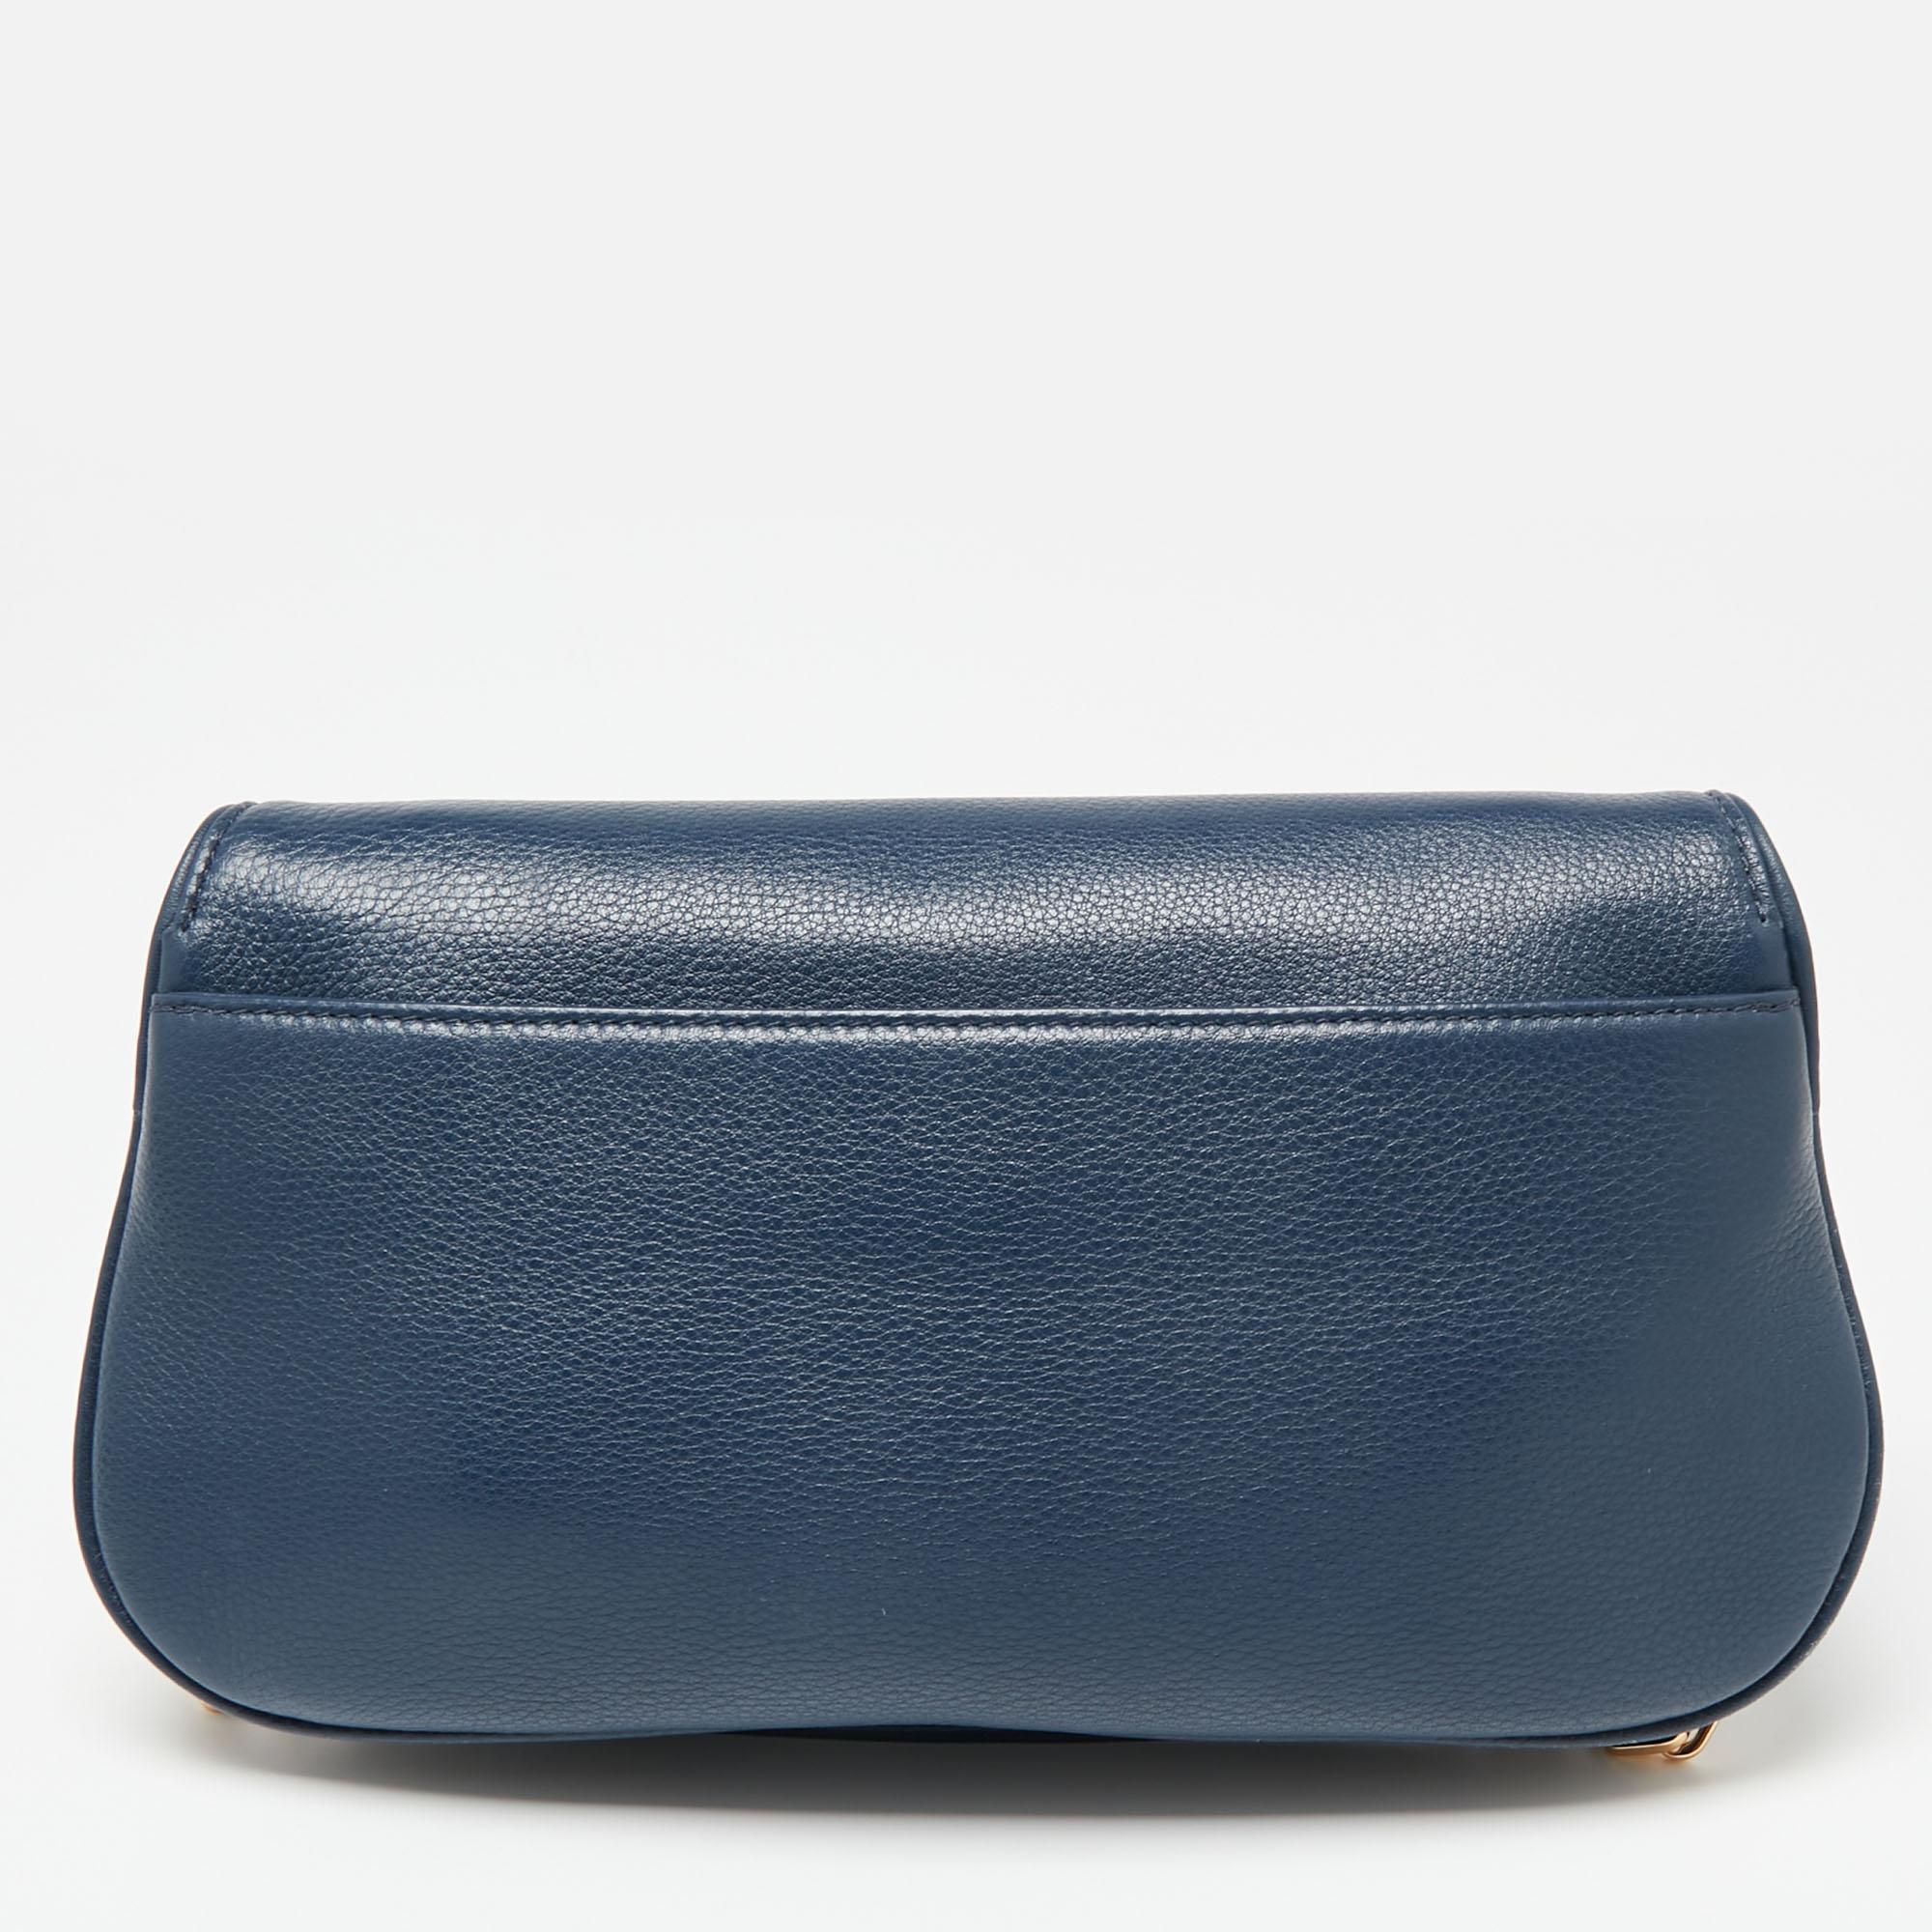 This crossbody bag from Tory Burch is crafted from blue leather and held by an adjustable shoulder strap. The Britten bag features the brand's iconic logo on the front flap and the brand plaque inside the nylon interior.

